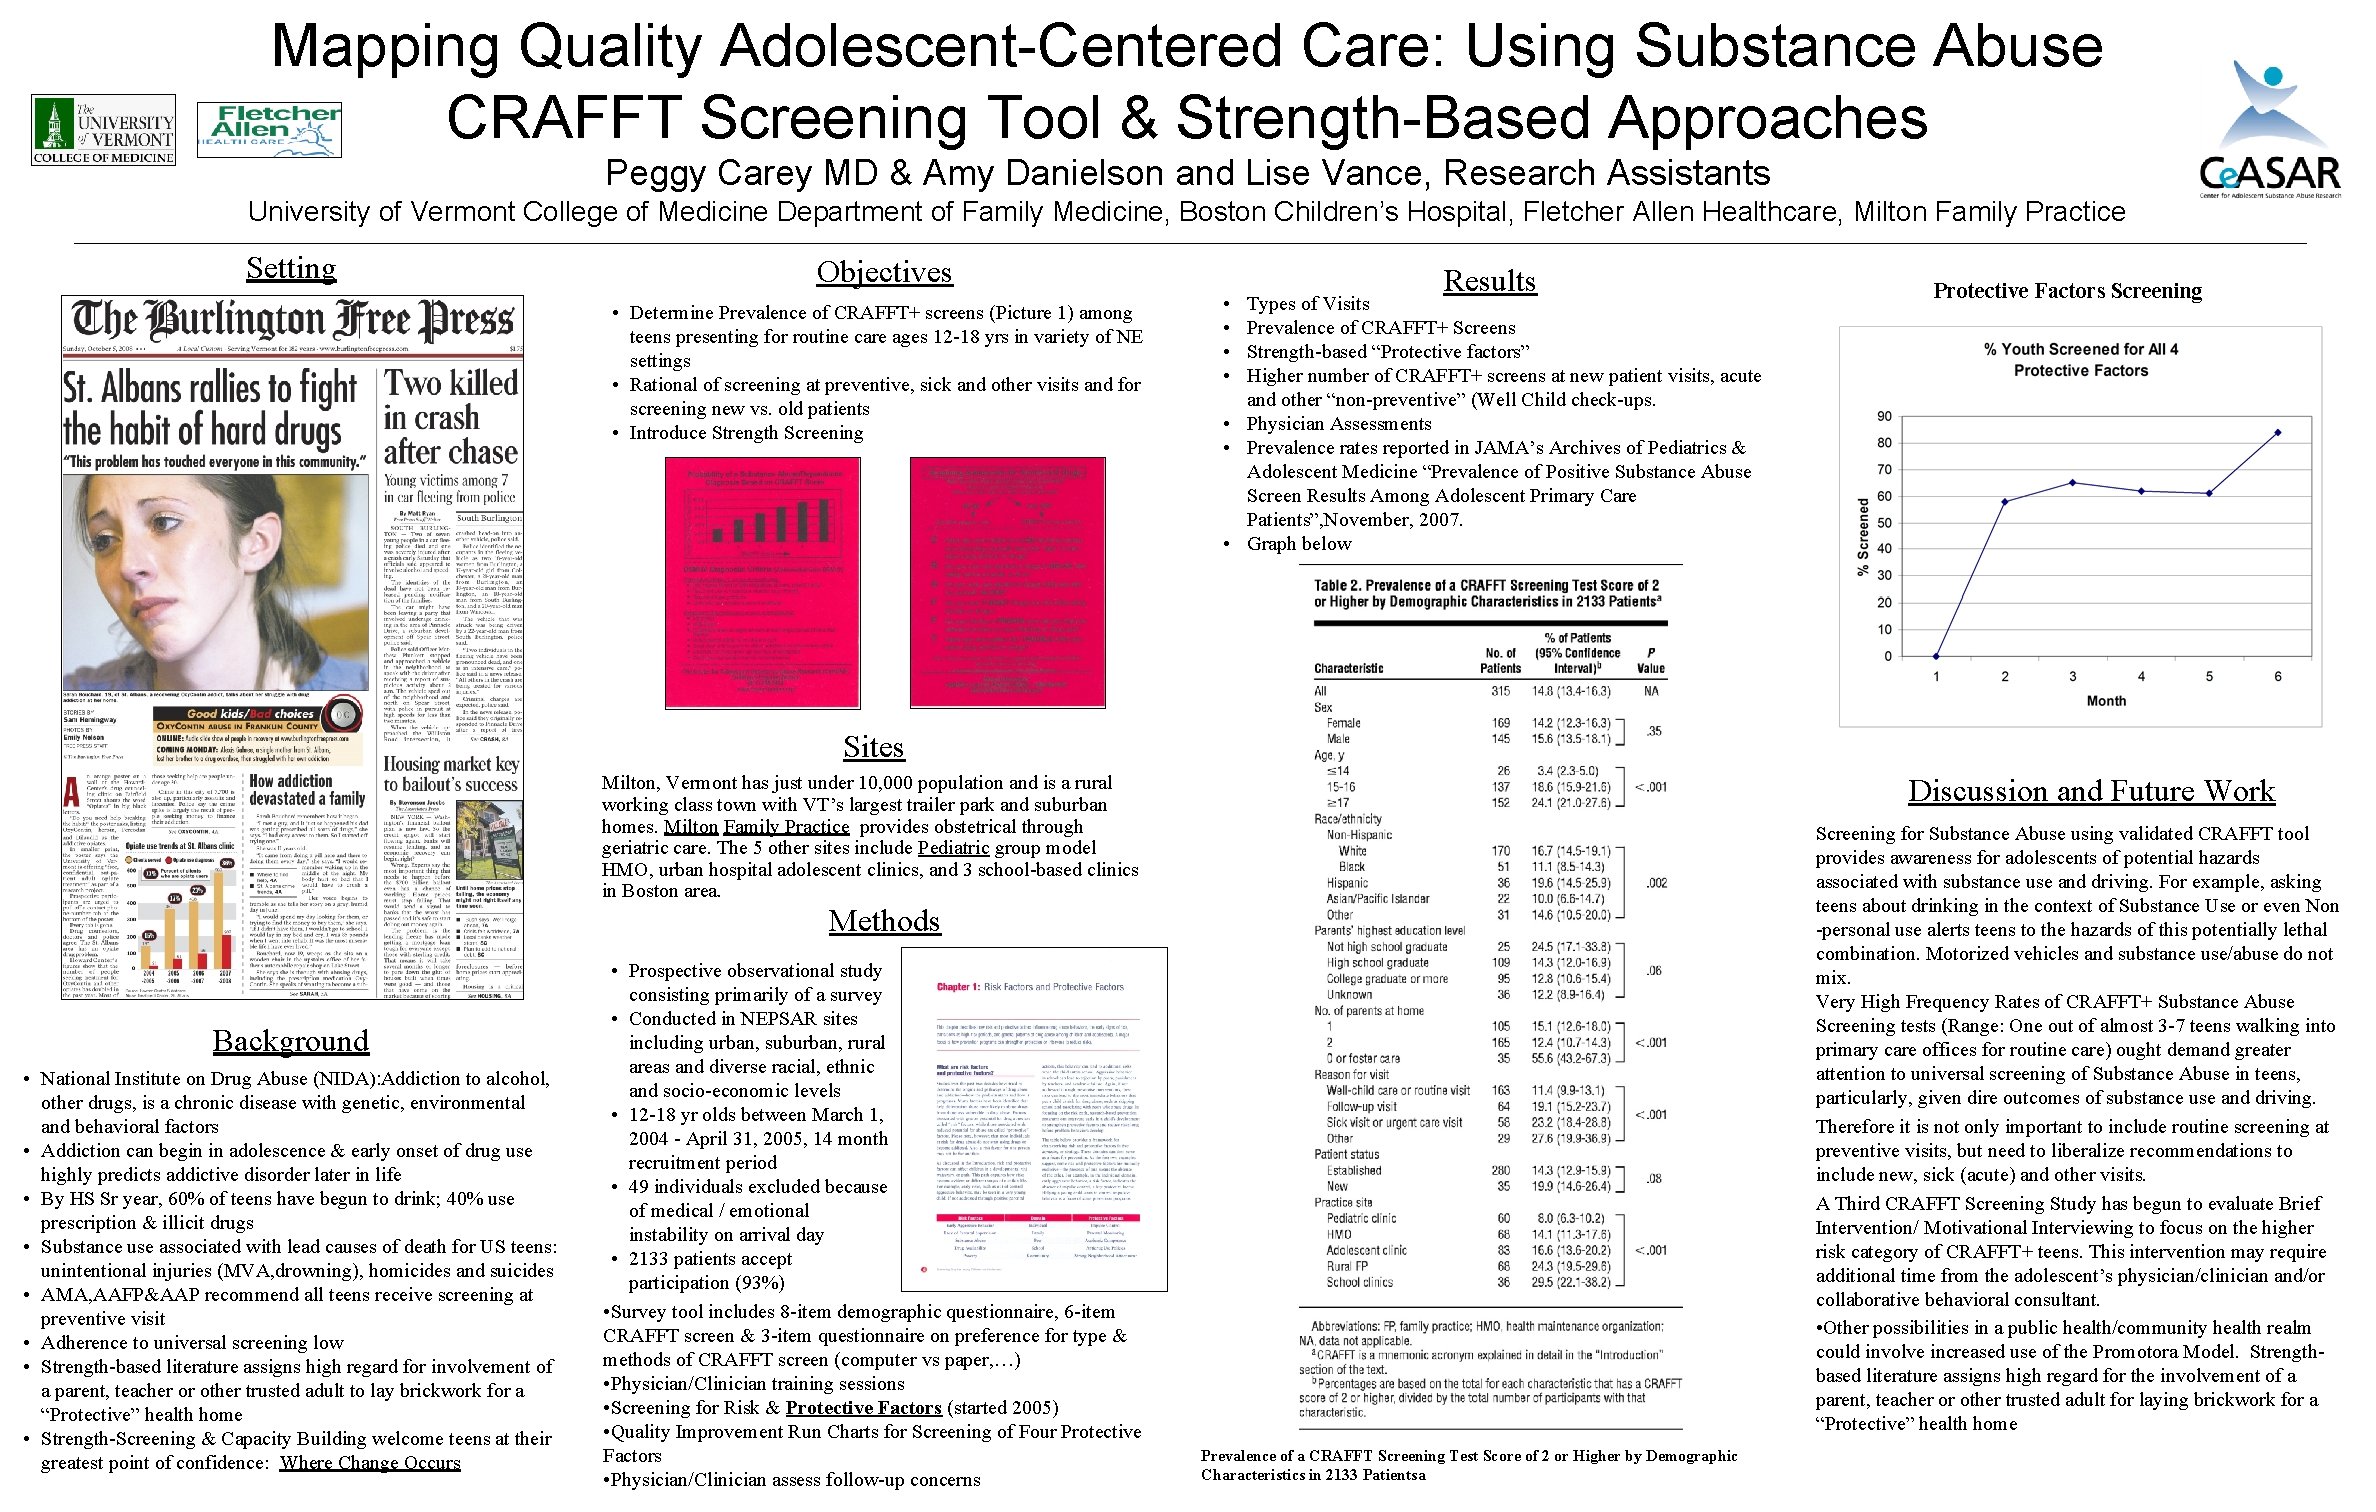 Mapping Quality Adolescent-Centered Care: Using Substance Abuse CRAFFT Screening Tool & Strength-Based Approaches Peggy